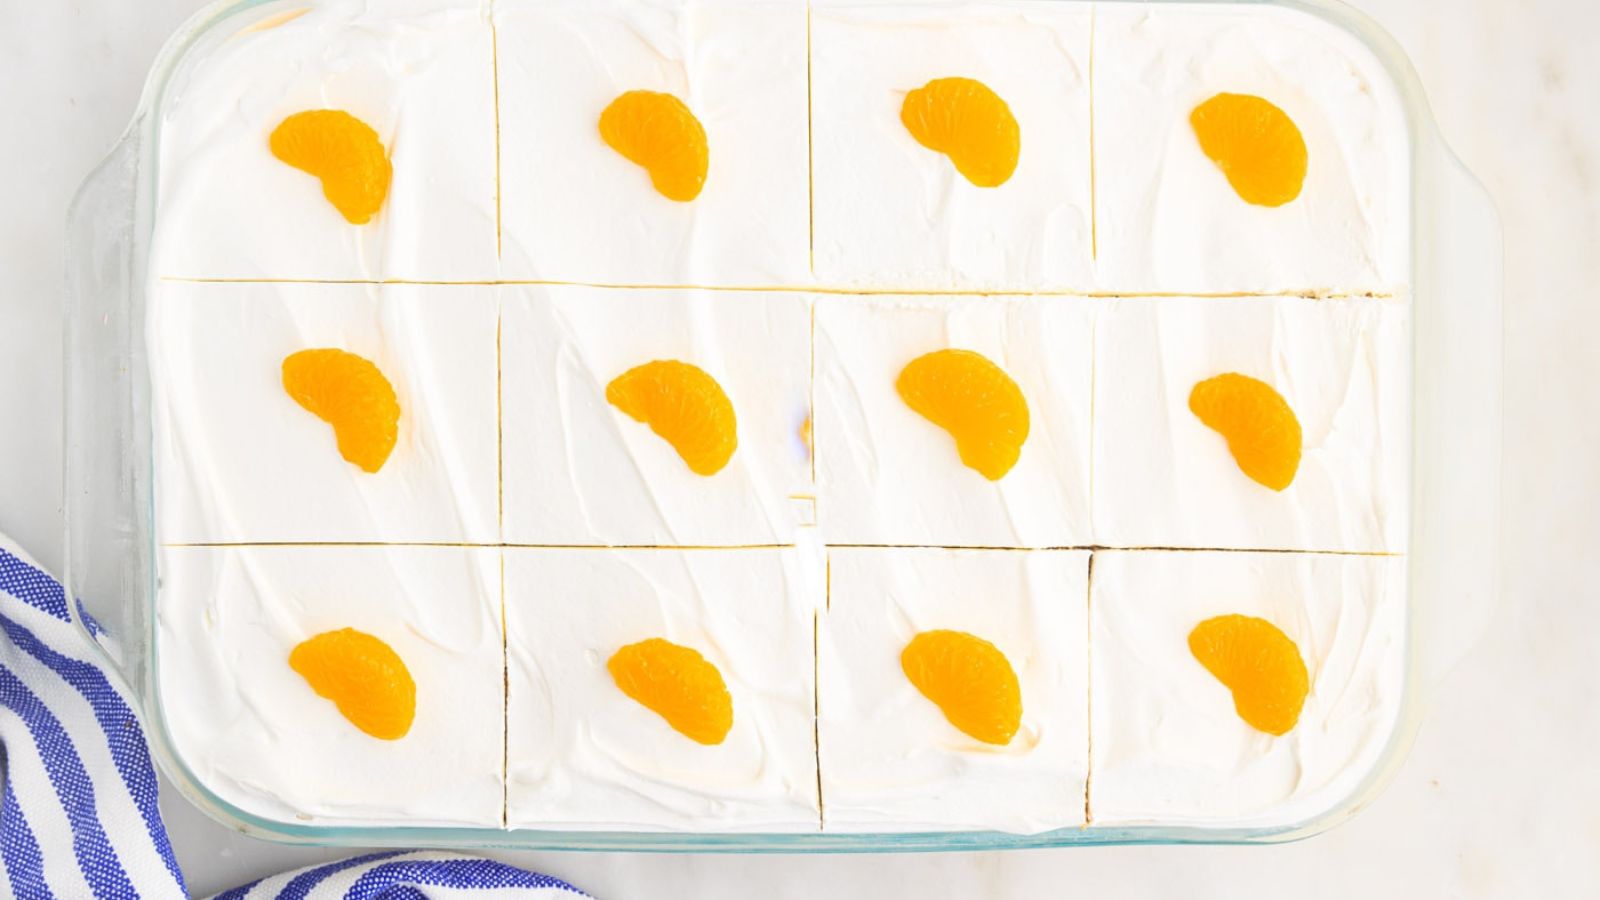 A cake sliced into squares with orange segments on top.